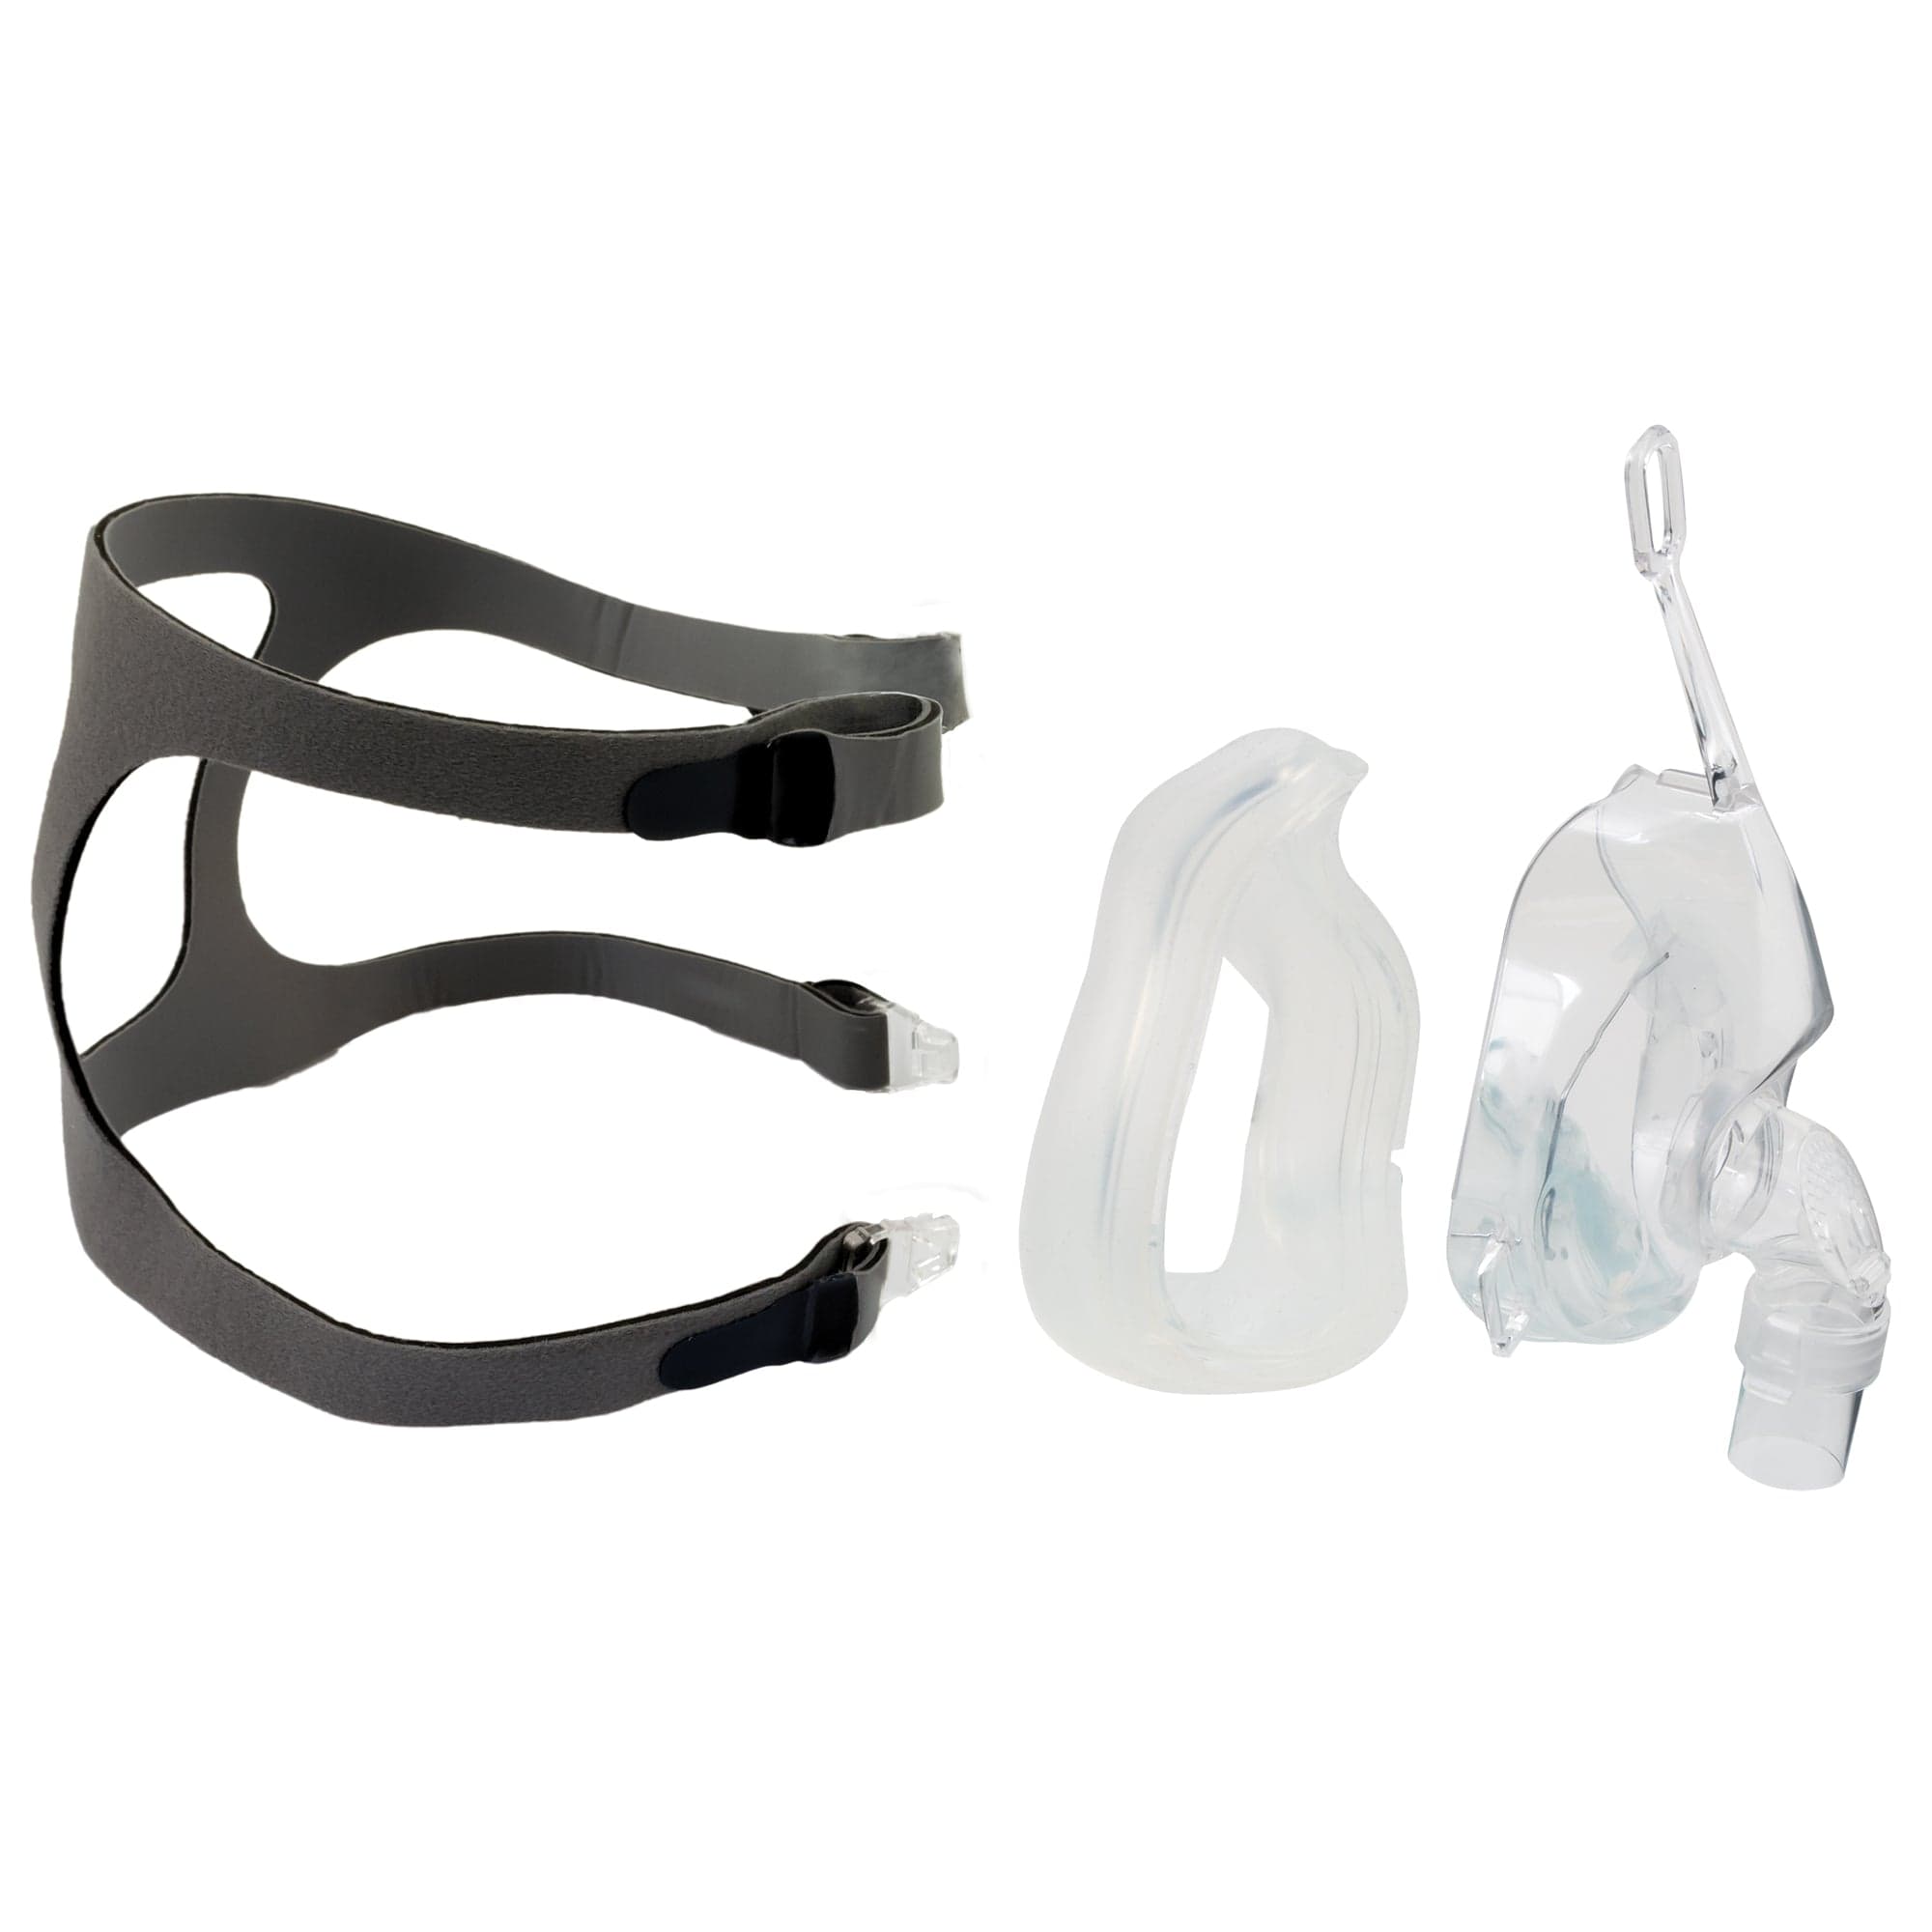 Compass Health Replacement Parts Compass Health DreamEasy 2 Full Face CPAP Mask with Headgear, All Sizes Kit